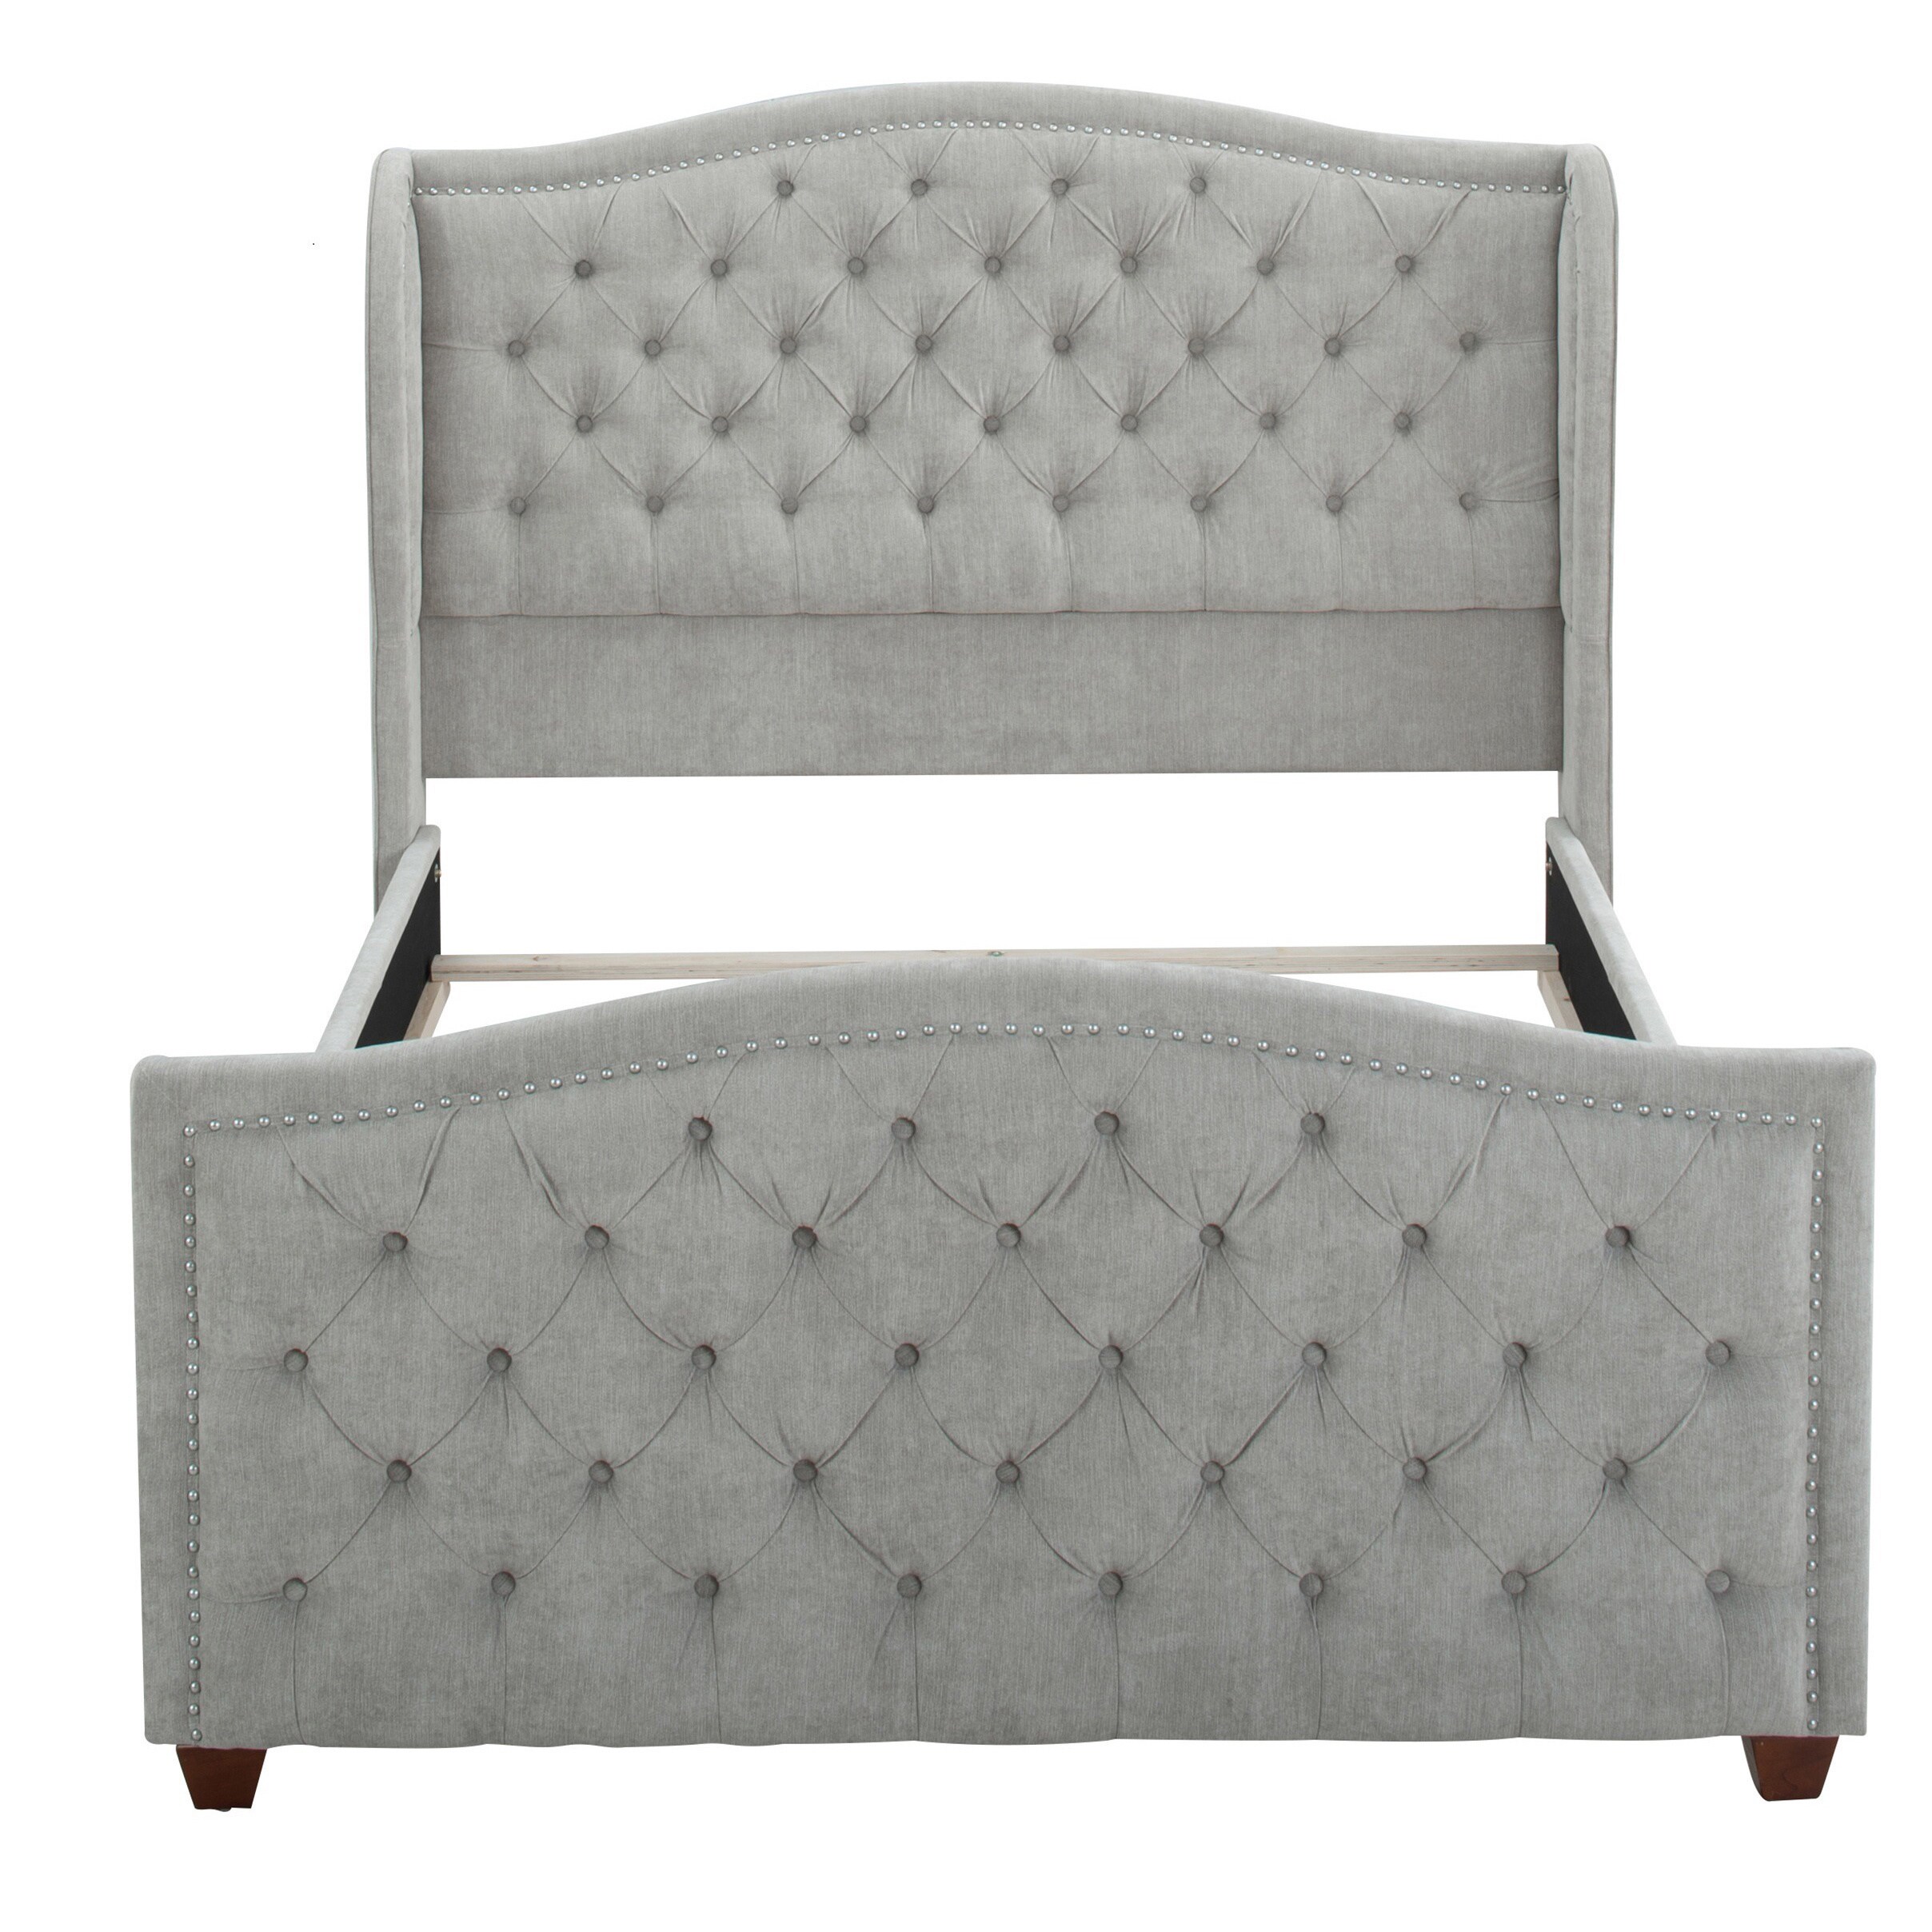 Shop Gracewood Hollow Follett Tufted Wingback Upholstered Bed - Free ...